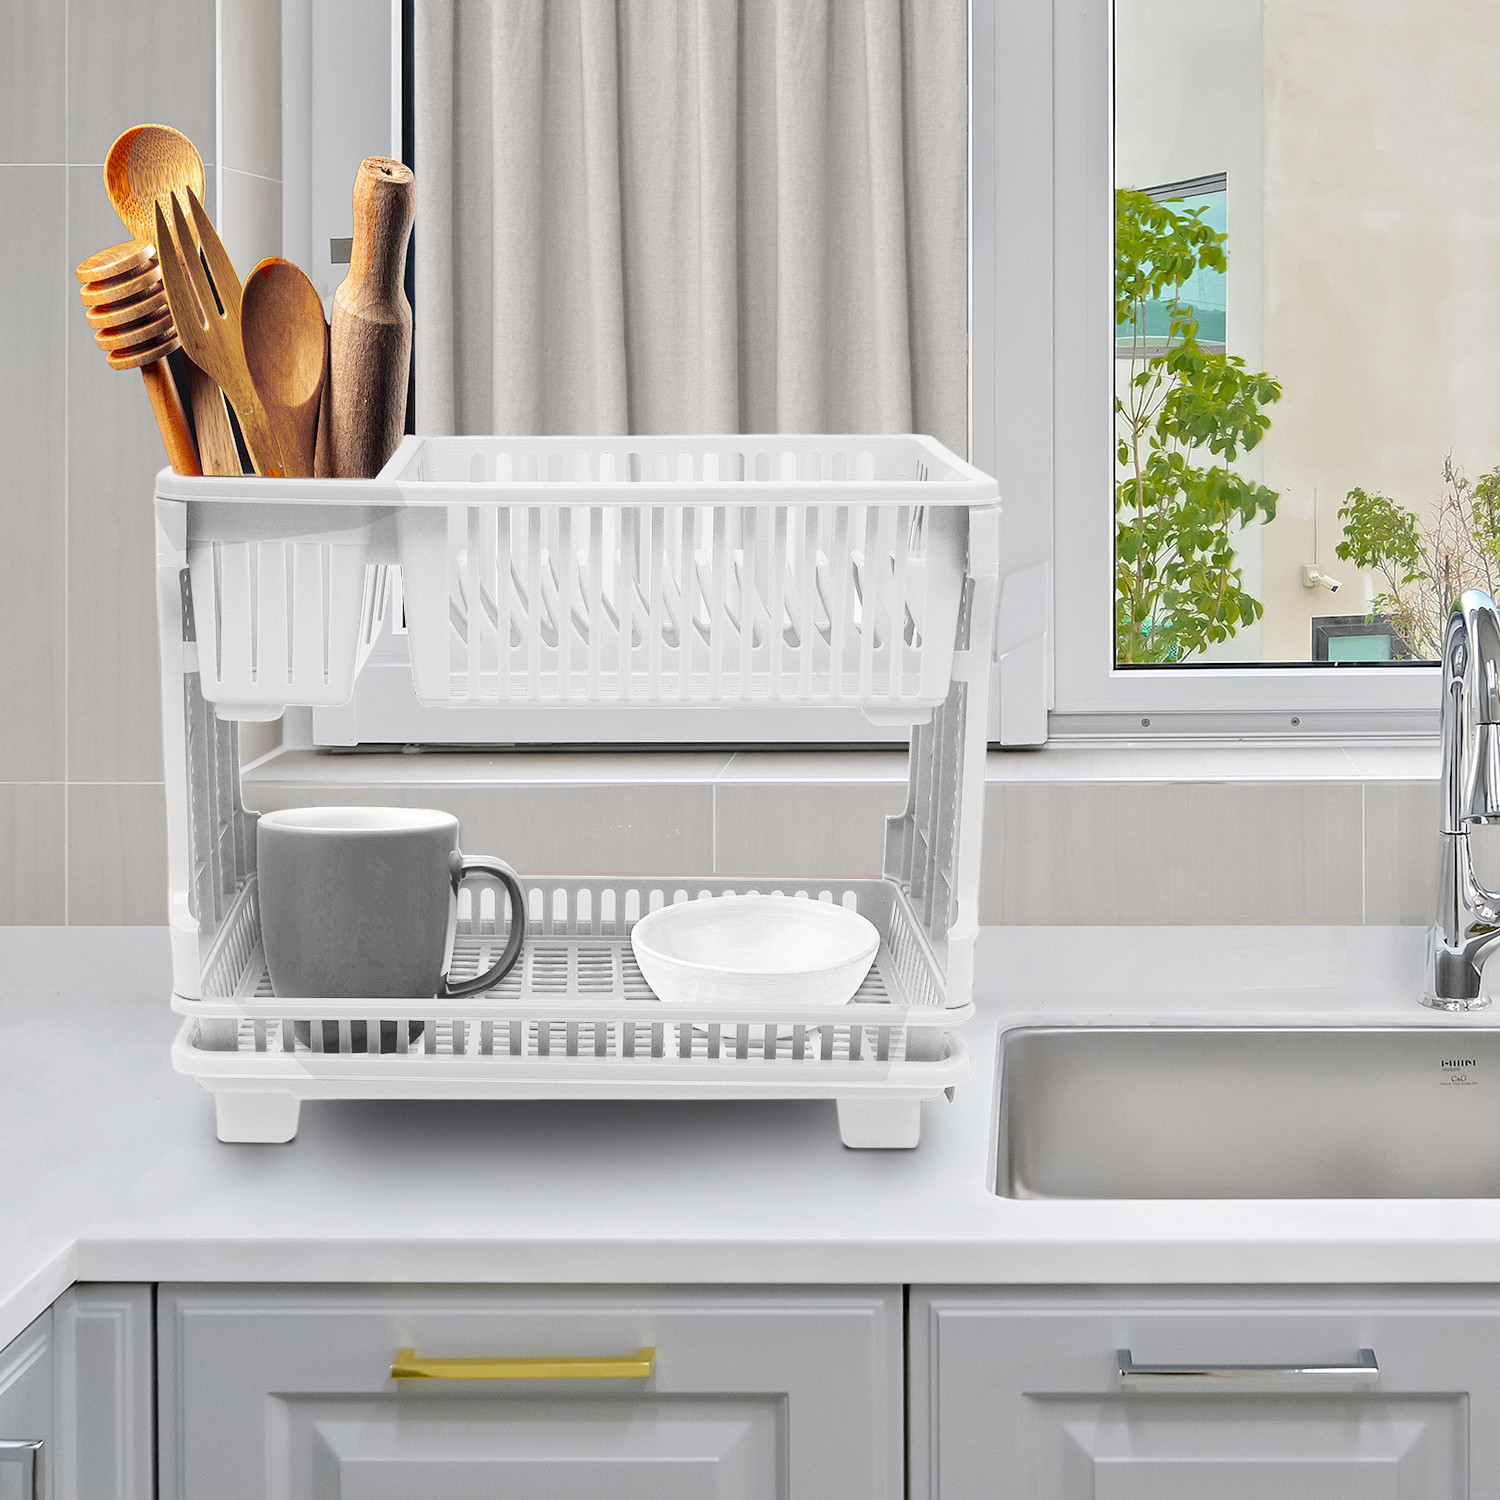 Kuber Industries Dish Rack | Plastic Dish Rack with Drainer | Drying Basket with Tray | Kitchen Drying Rack with Tray | Bartan Stand for Kitchen | Bartan Jali Rack | White